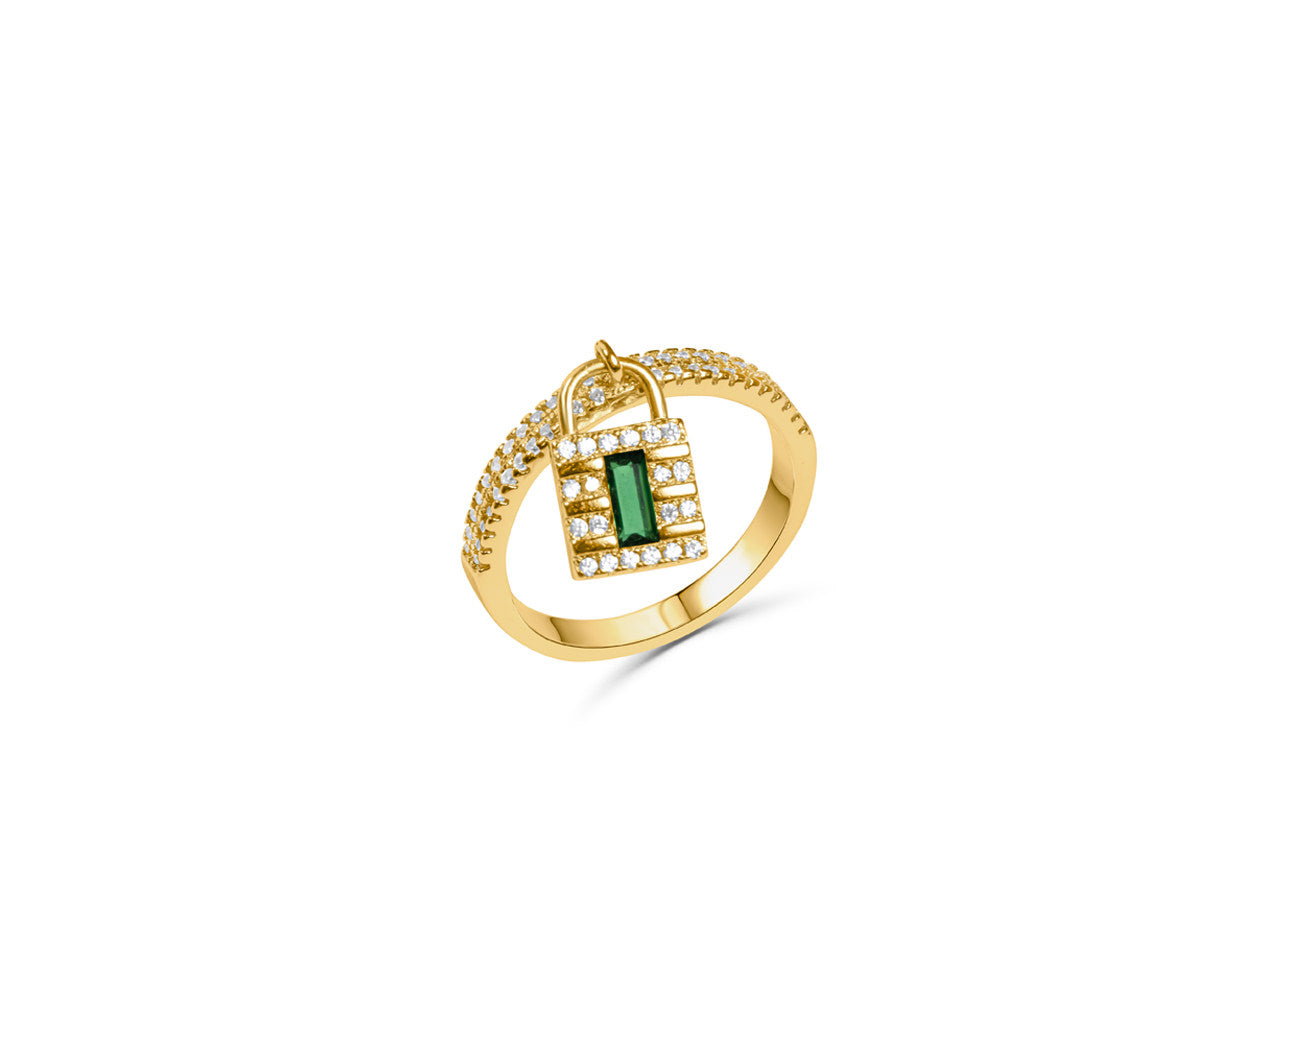 FAX Jewelry | 'Lockdown' 18K Gold Plated and Emerald Green Zirconia Ring 